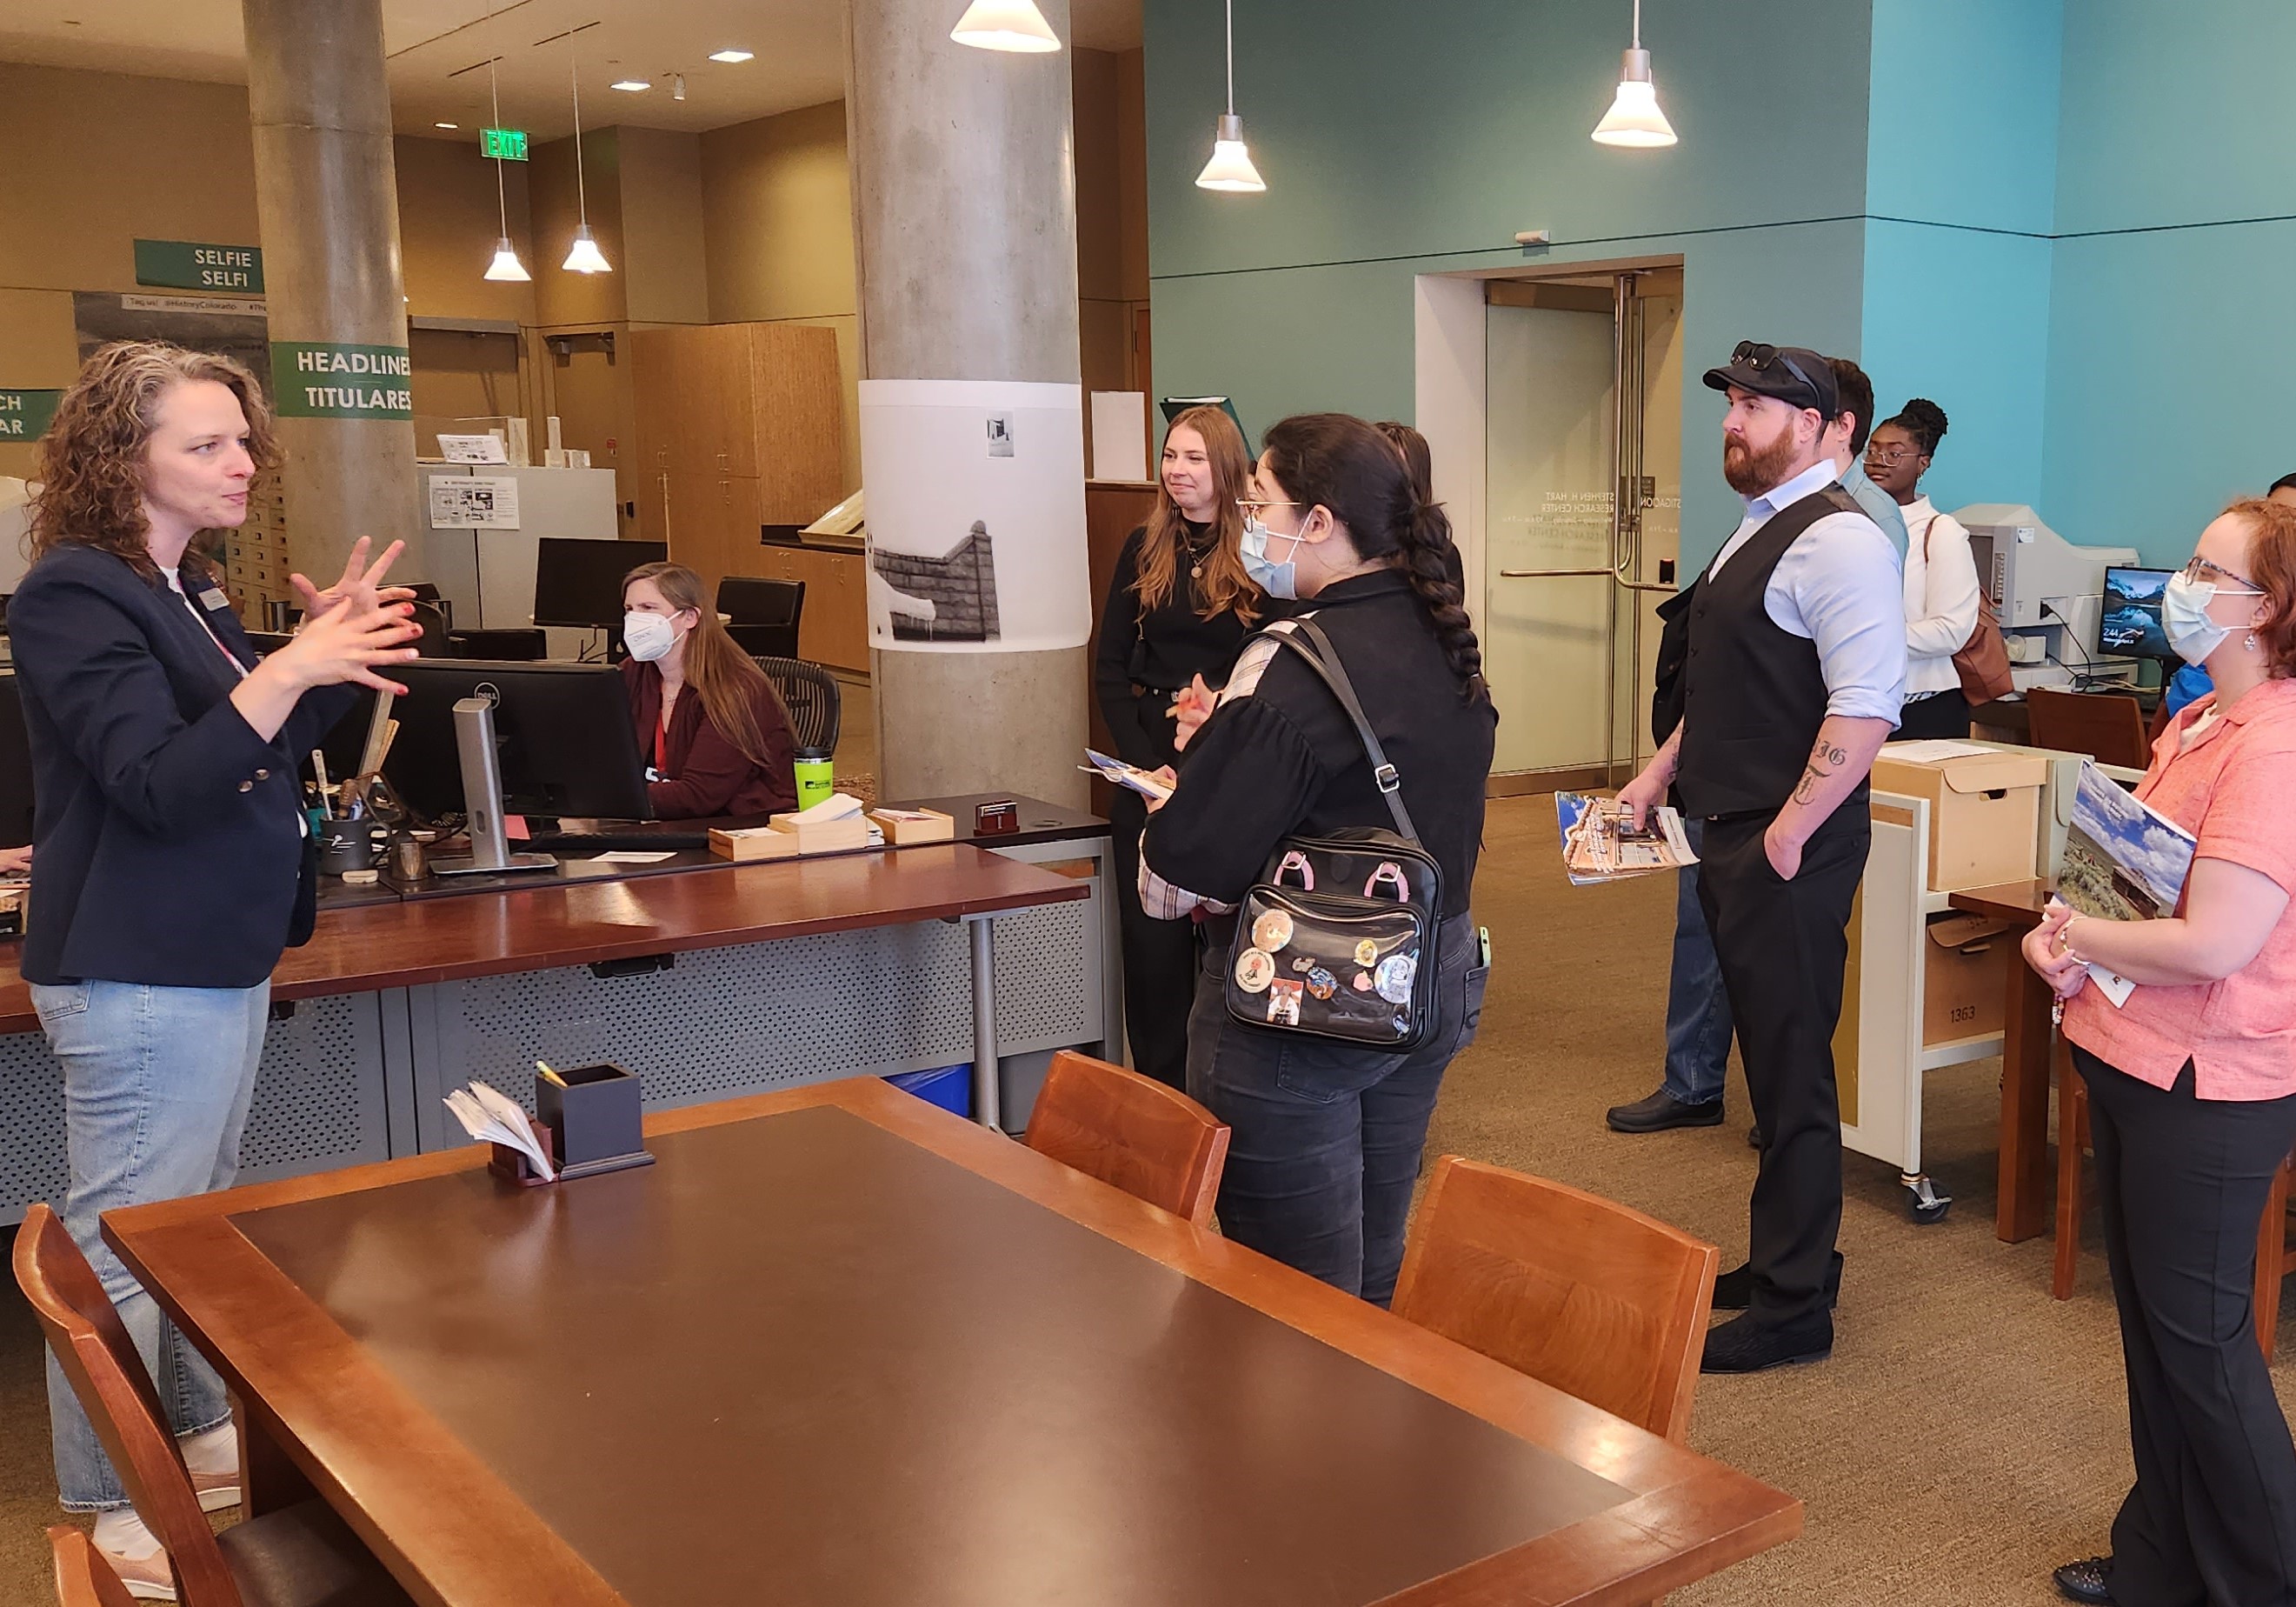 Exhibits and Loan Registrar Kimberly Kronwall speaking to a group of visitors in the Stephen H. Hart research center by a large table.